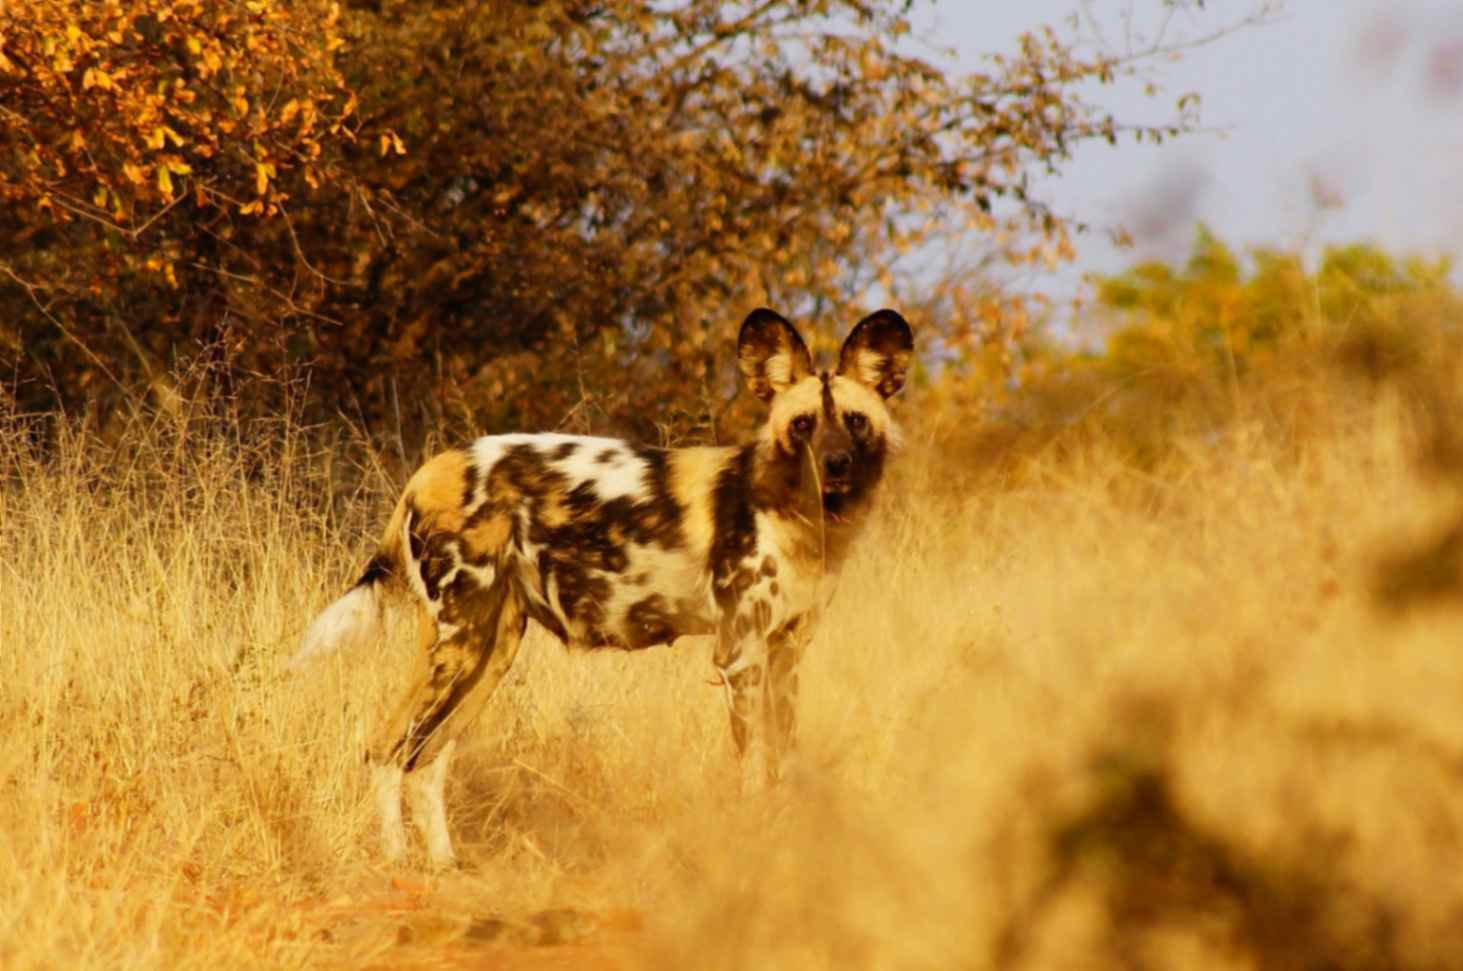 one of the best places in the world to catch the wild dog is at chobe national park.